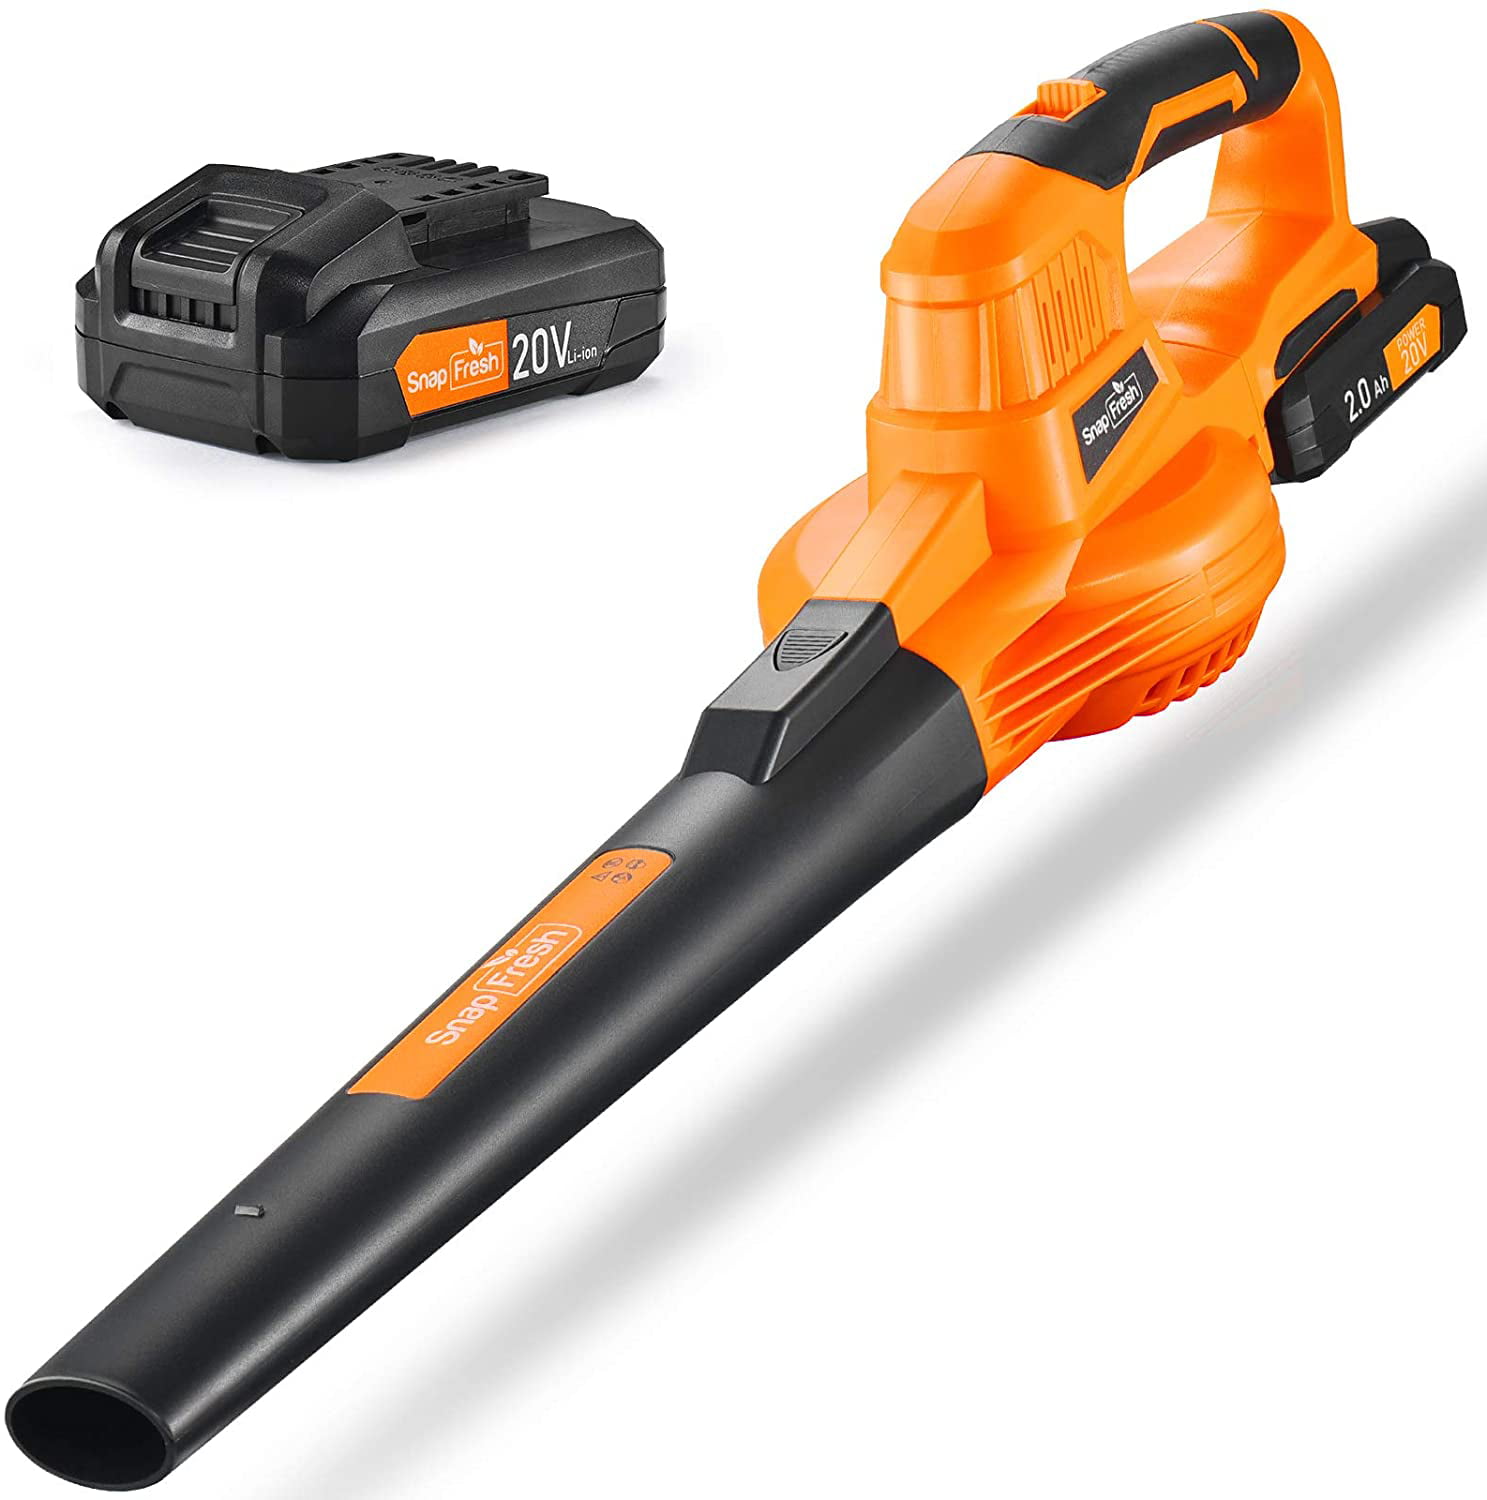 120MPH 20V Li-ion Battery Powered Cordless Leaf Blower Sweeper Charger Included 